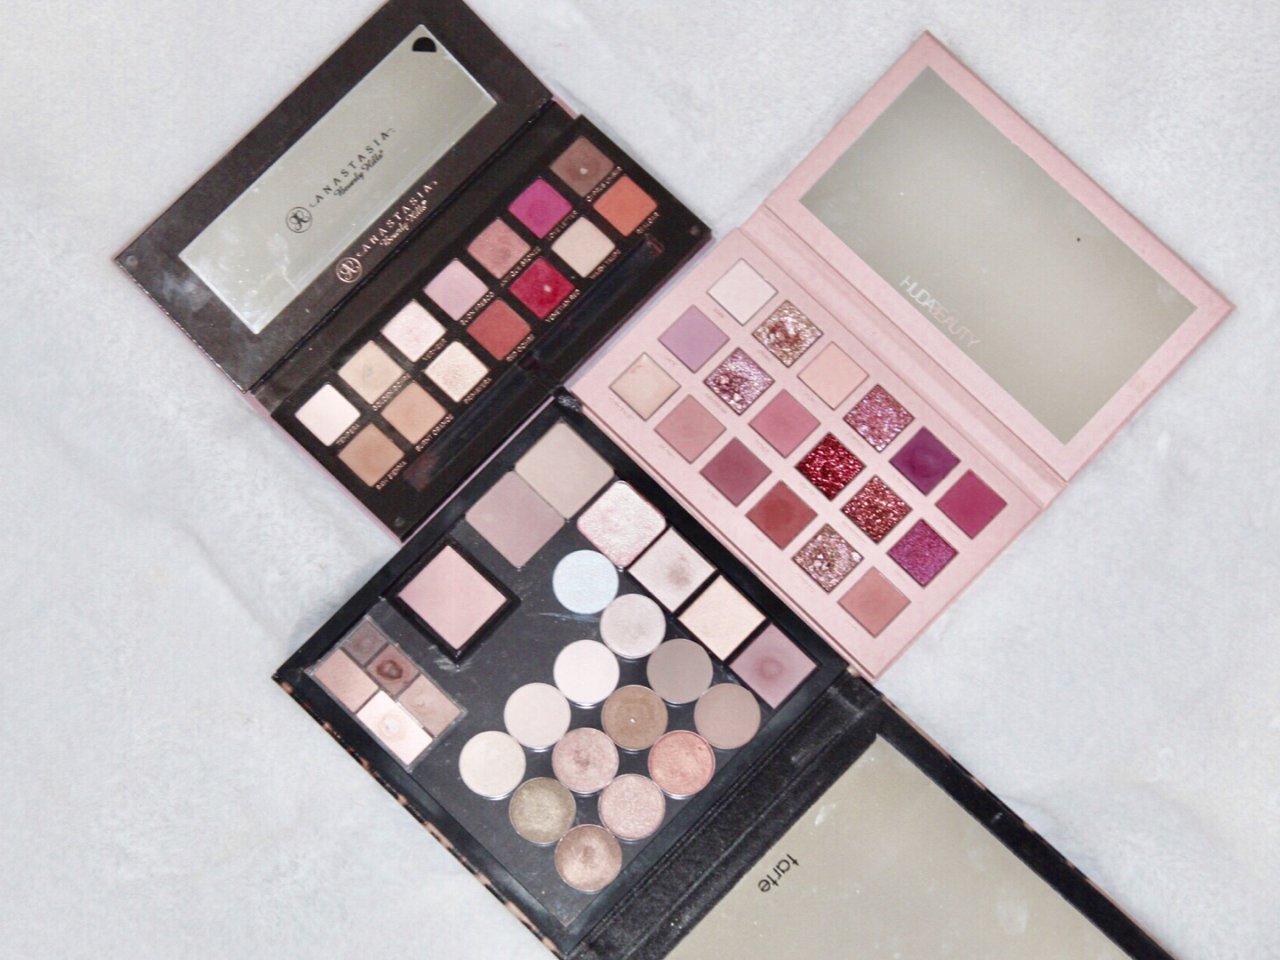 Anastasia Beverly Hills,Huda Beauty,M.A.C 魅可,Canmake,Surratt,Make Up For Ever 浮生若梦